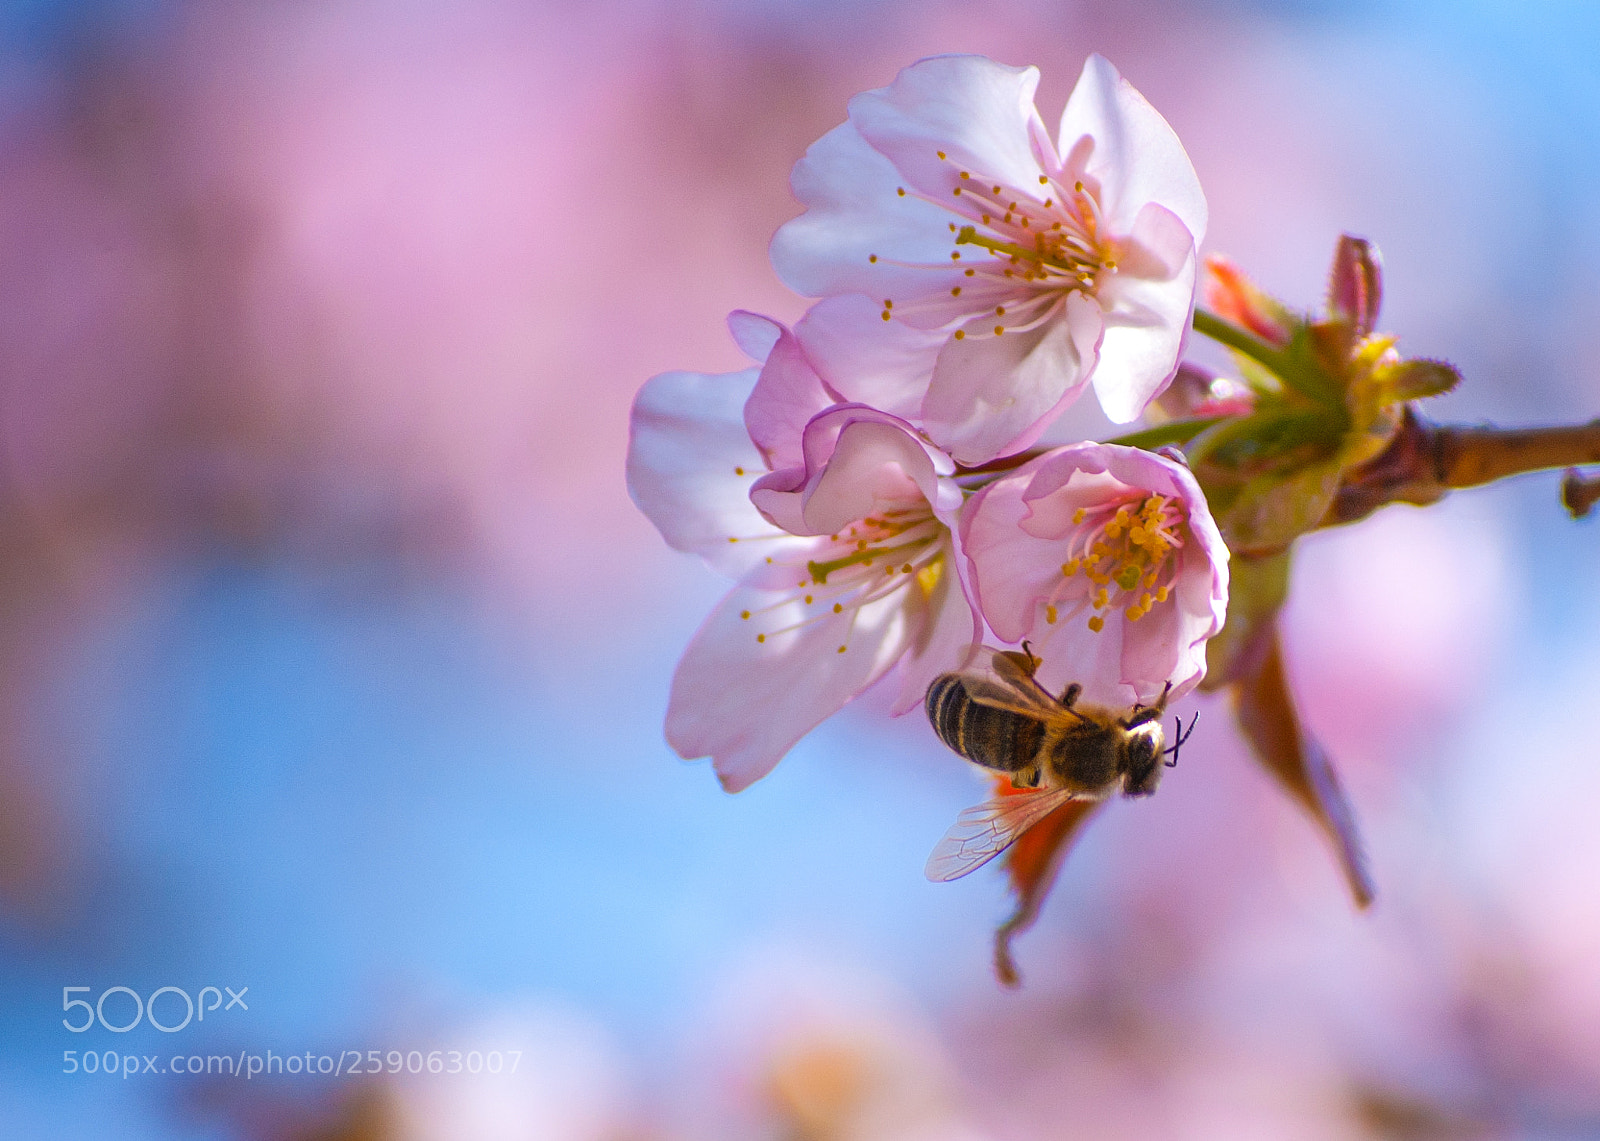 Nikon D40 sample photo. Blossom and the bee photography